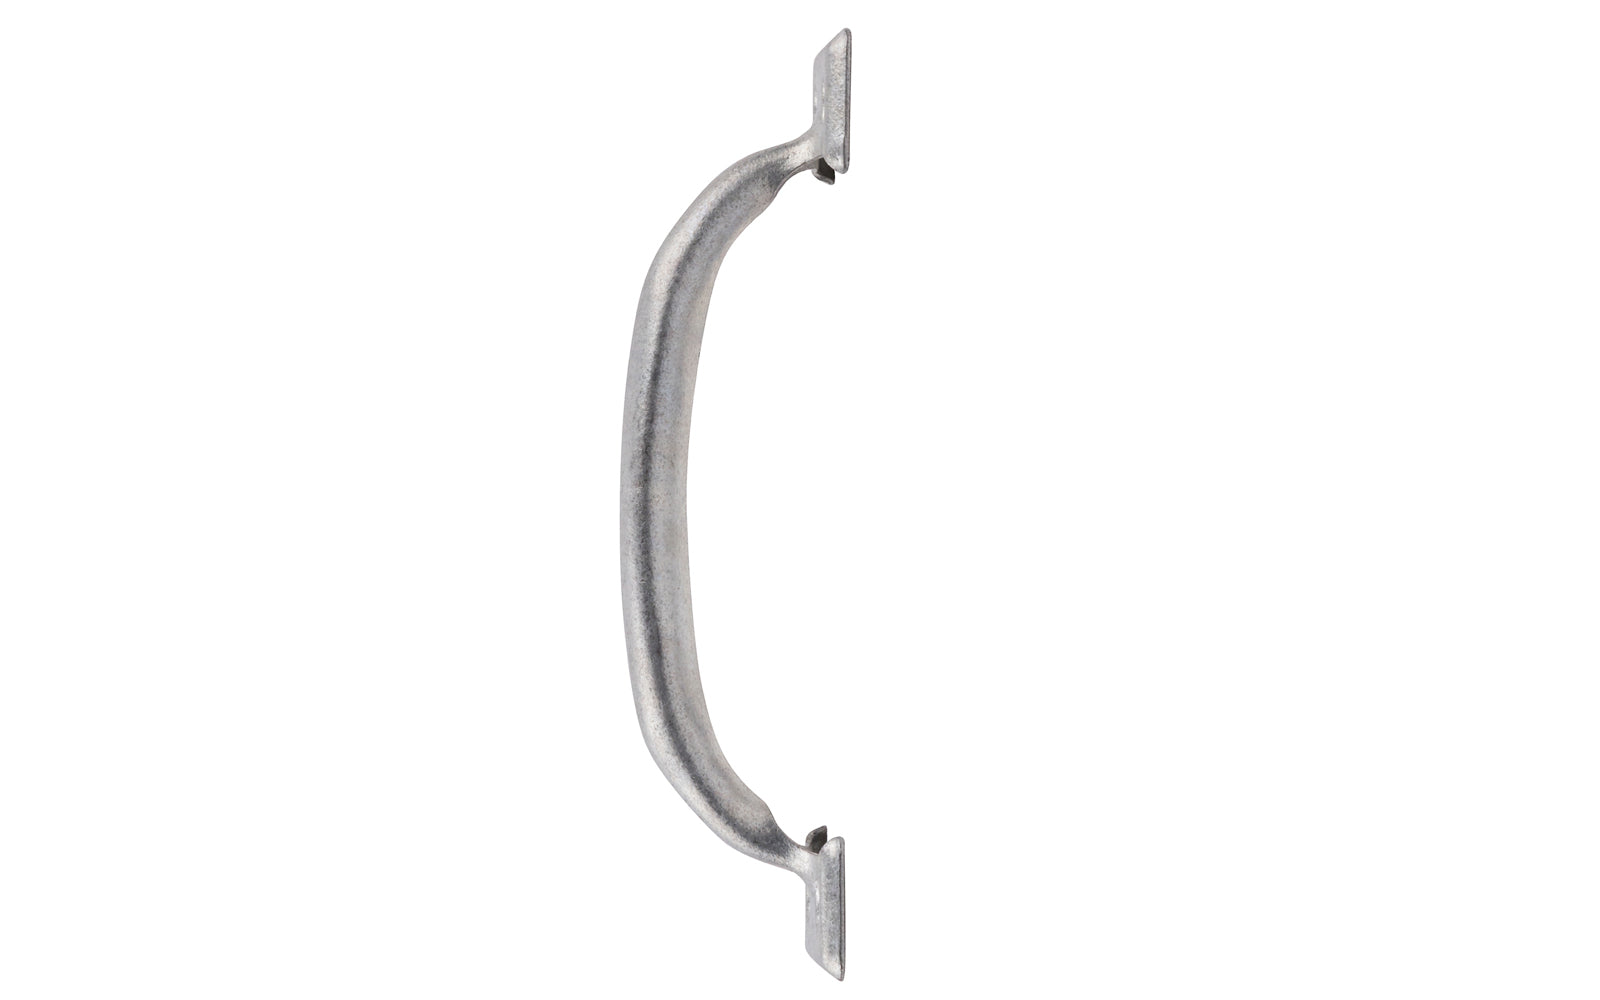 This galvanized coated utility pull is designed for general use on drawers, doors, & a variety of other applications. Includes fasteners. Made of steel material with galvanized finish. Available 5-3/4